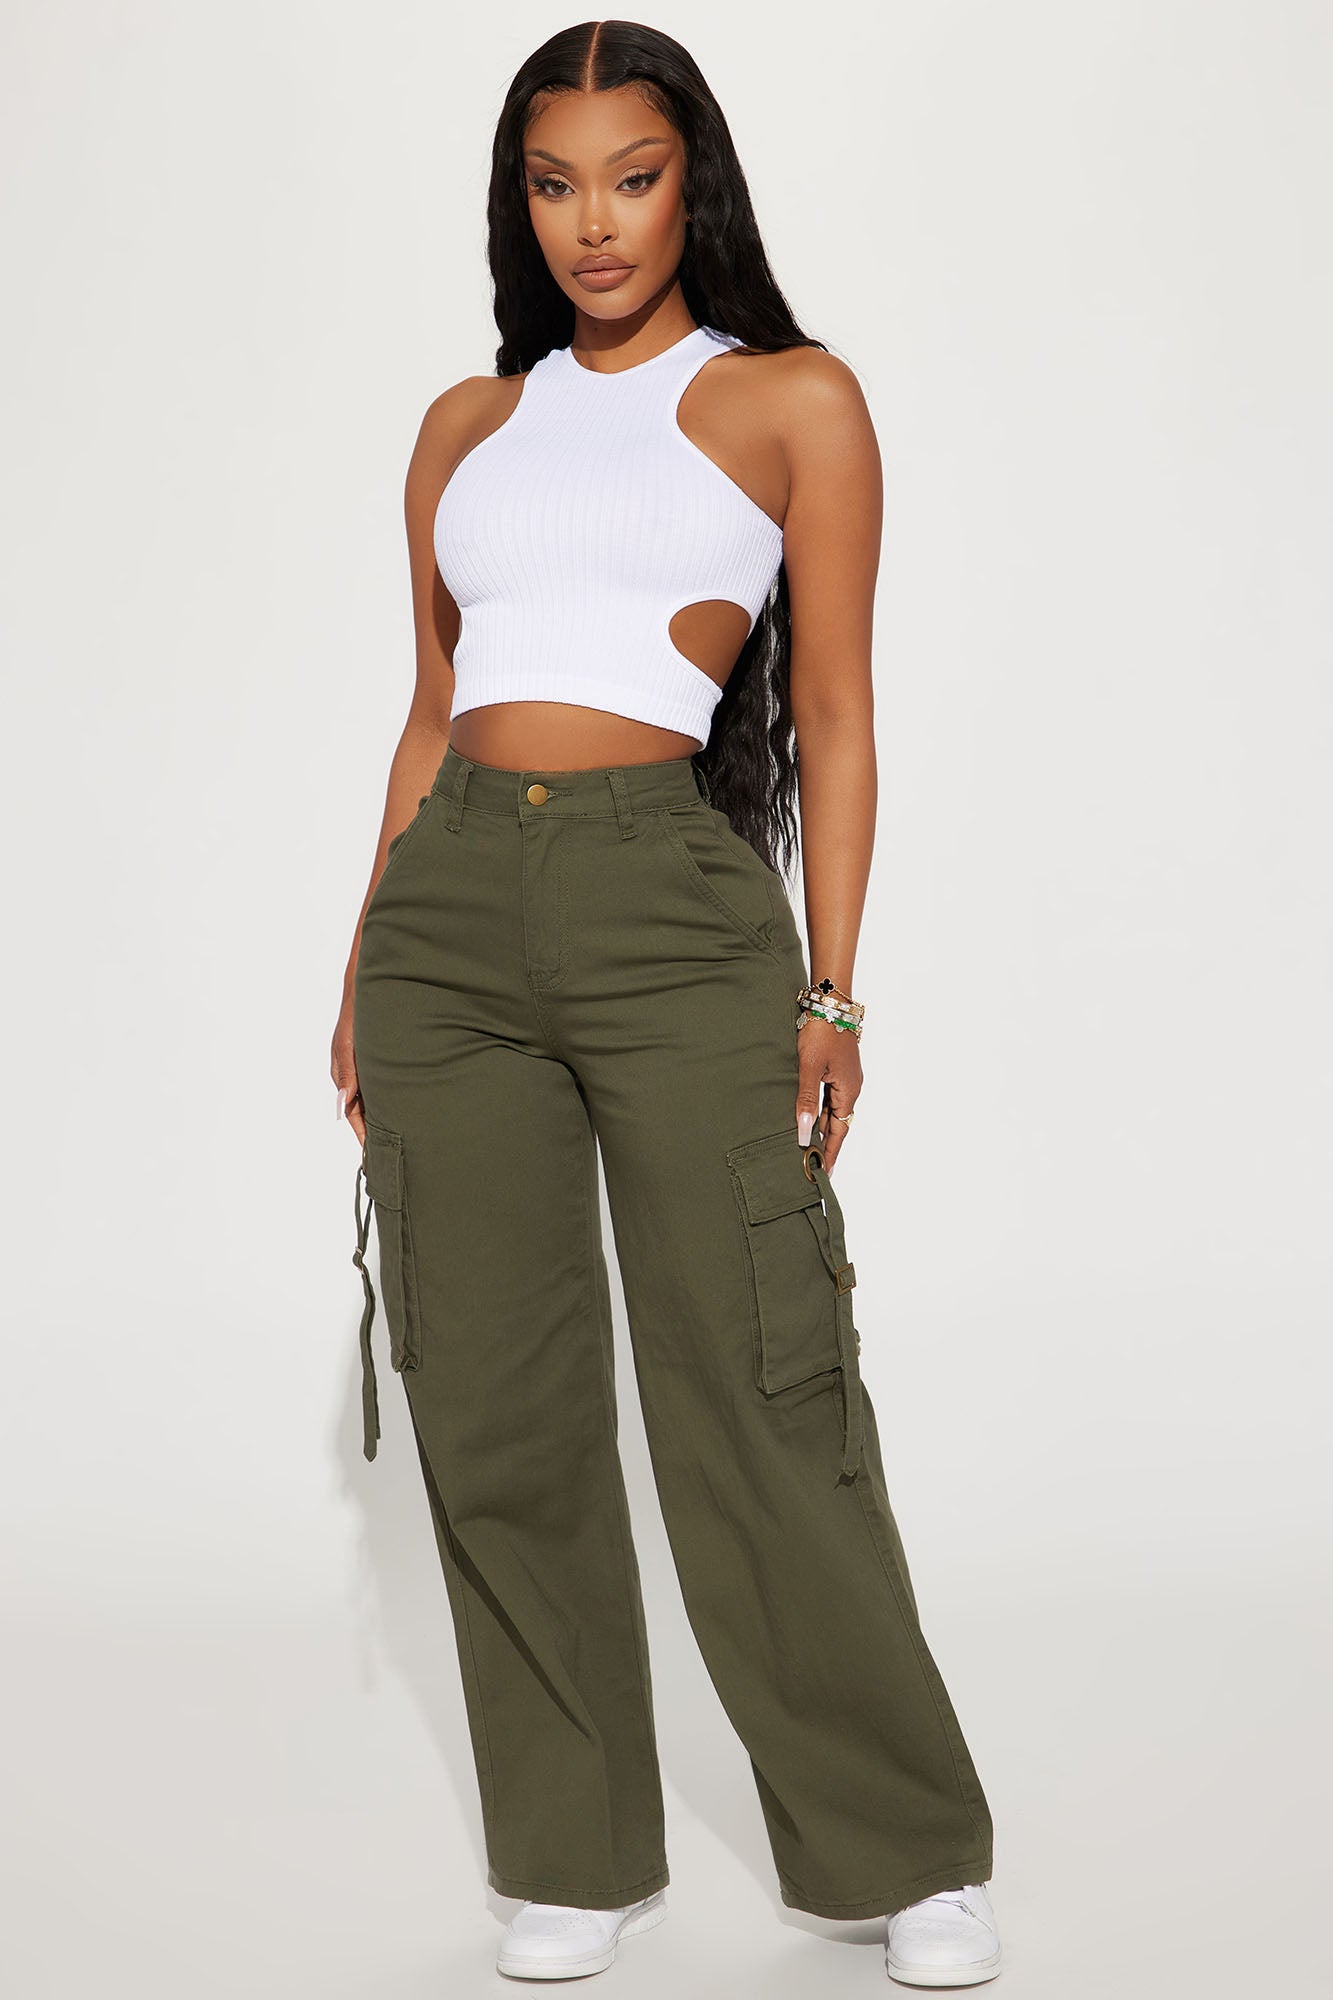 6 Ways to Wear Cute Olive Cargo Pants - A Lily Love Affair | Olive pants  outfit, Cargo pants outfit, Olive green cargo pants